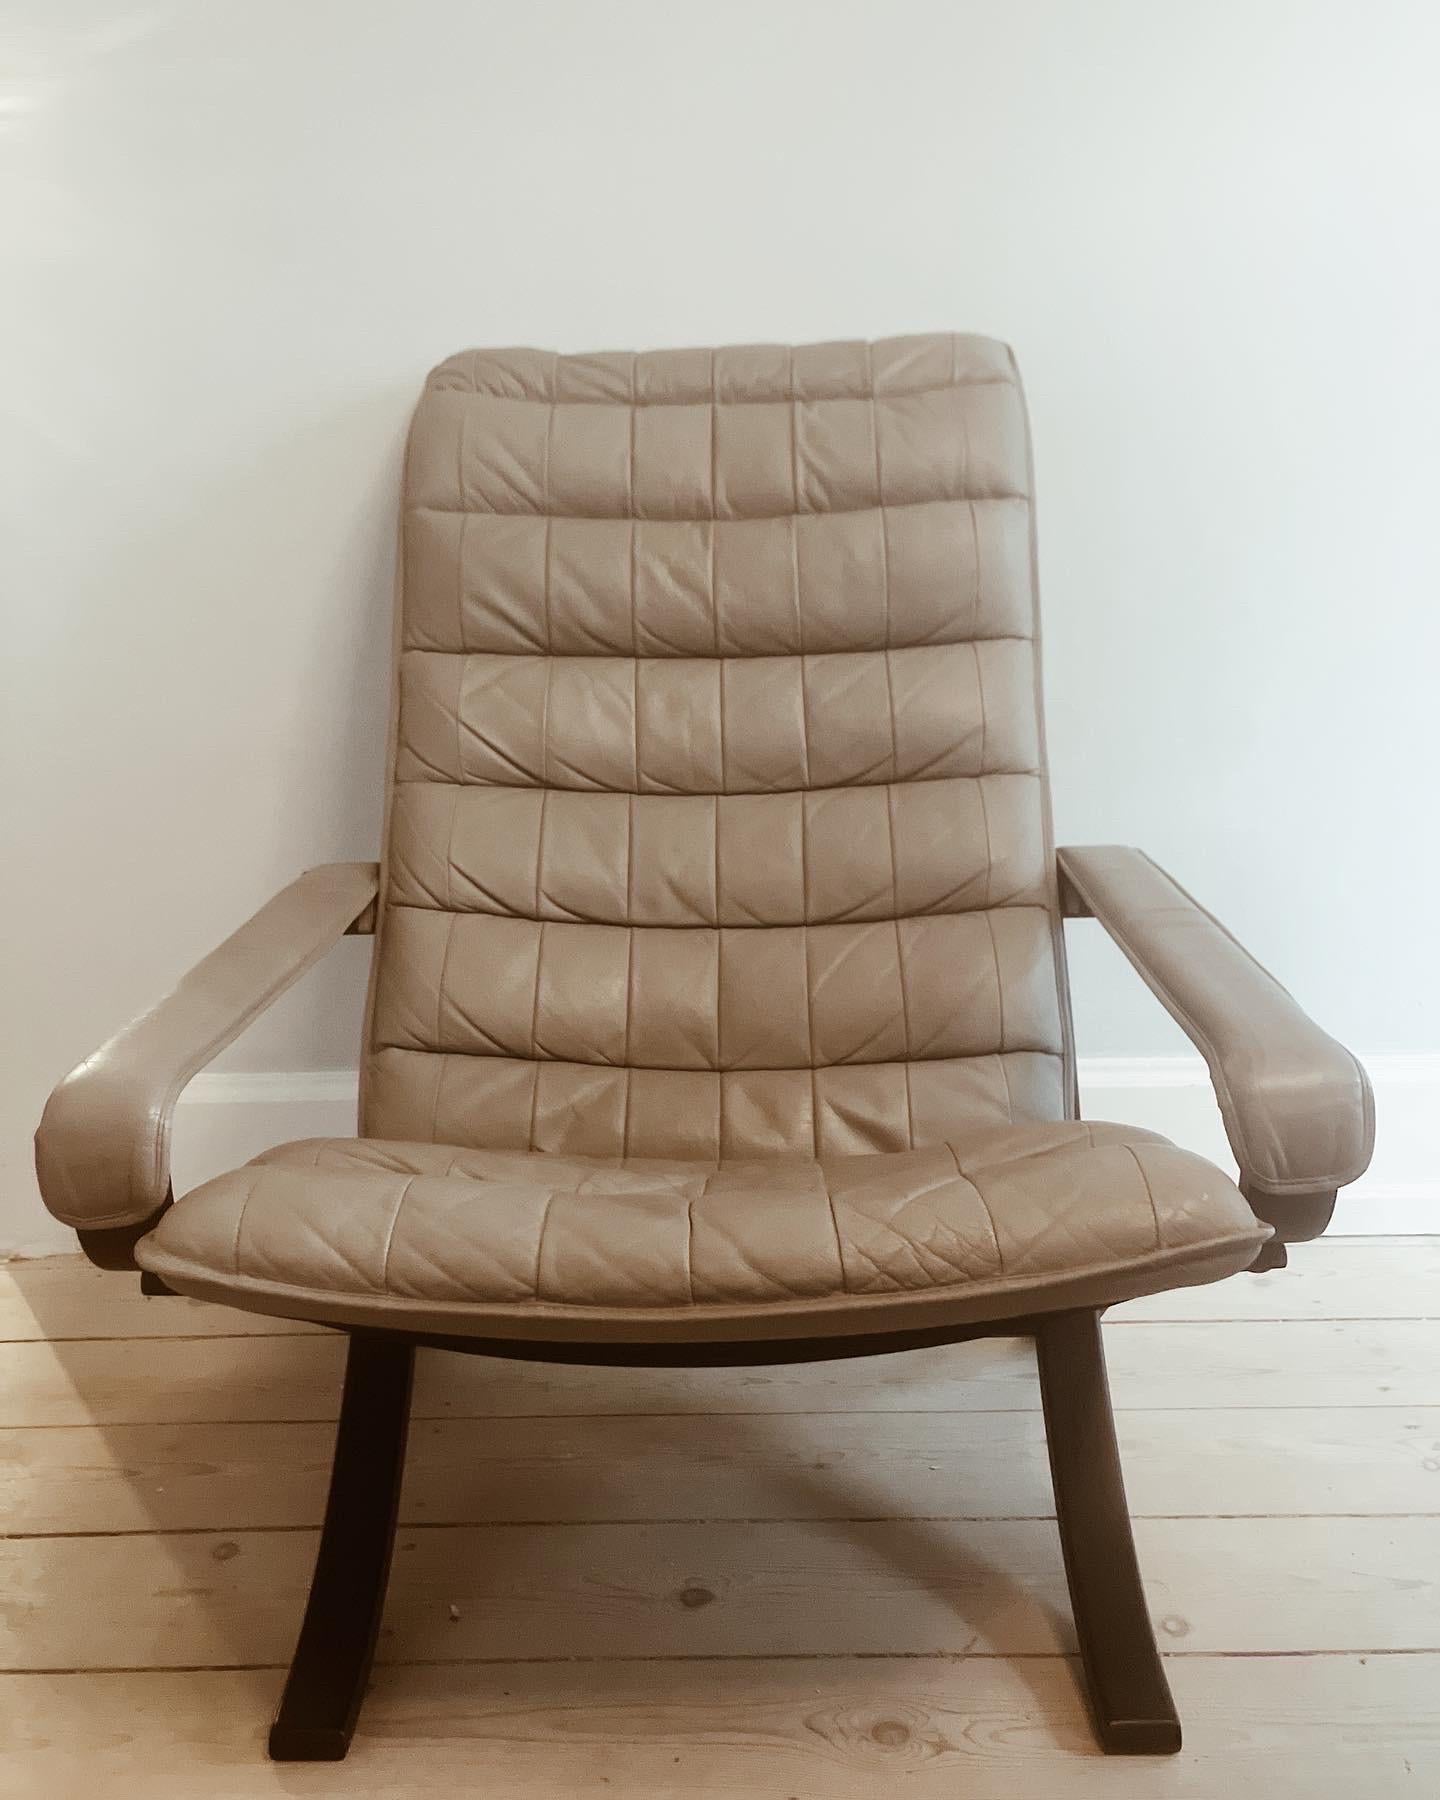 This Flex chair was designed by Ingmar Relling during the 1970s and were produced by Westnofa in Norway. 

Its the deep large highback version. In an excellent vintage condition with minimal traces of use. 

The leather pieces are made from